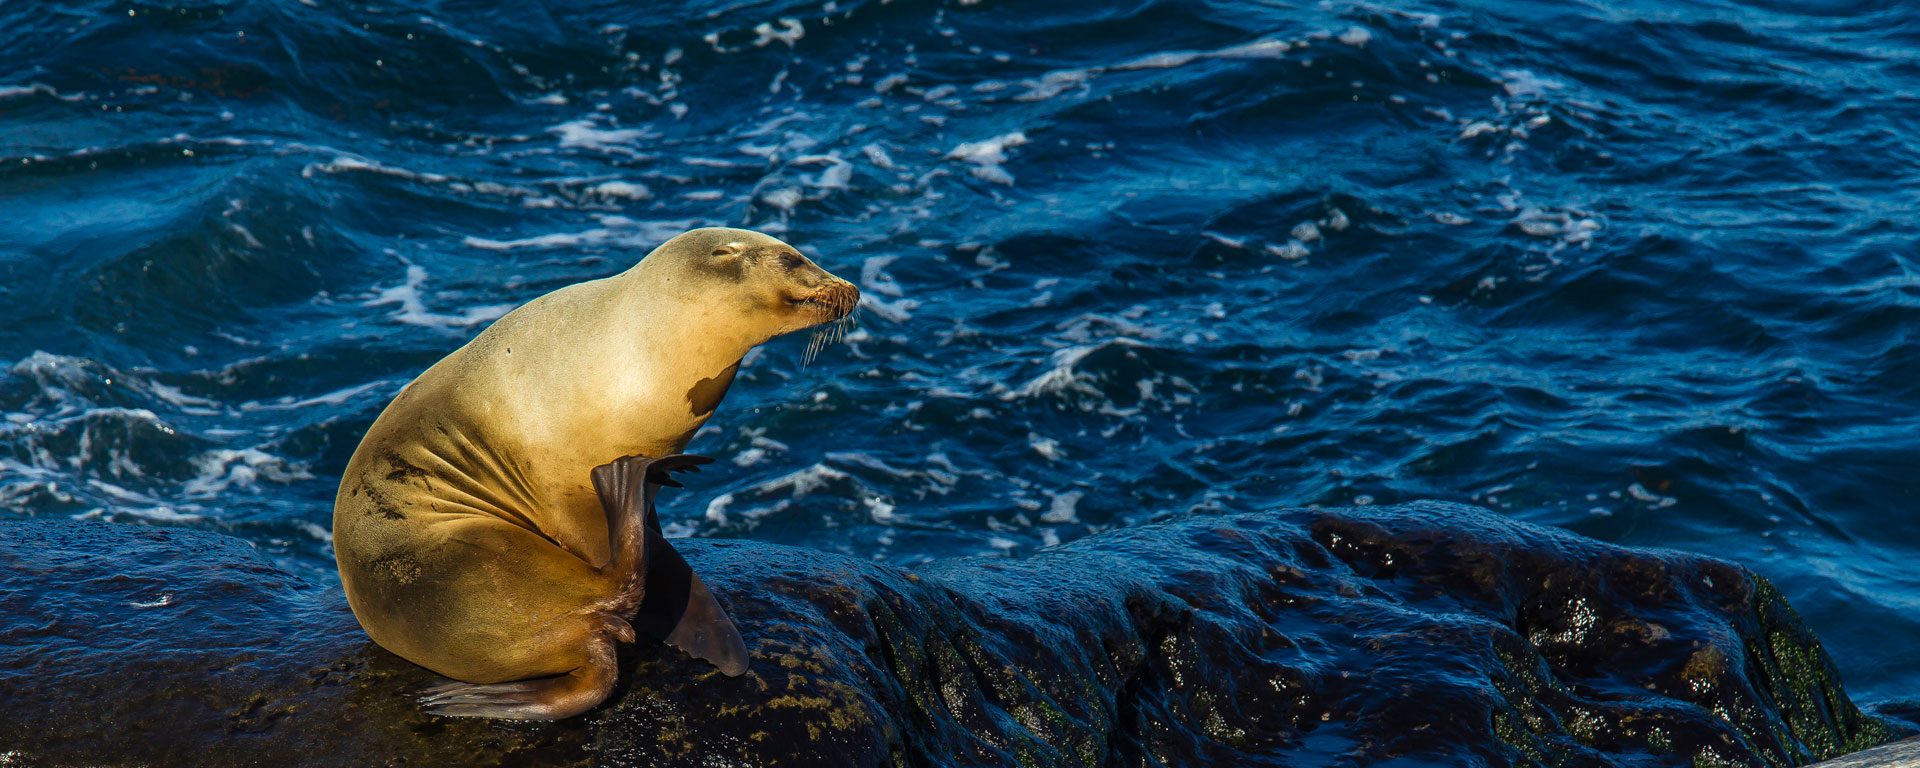 Sea lions playing on rocks in the water